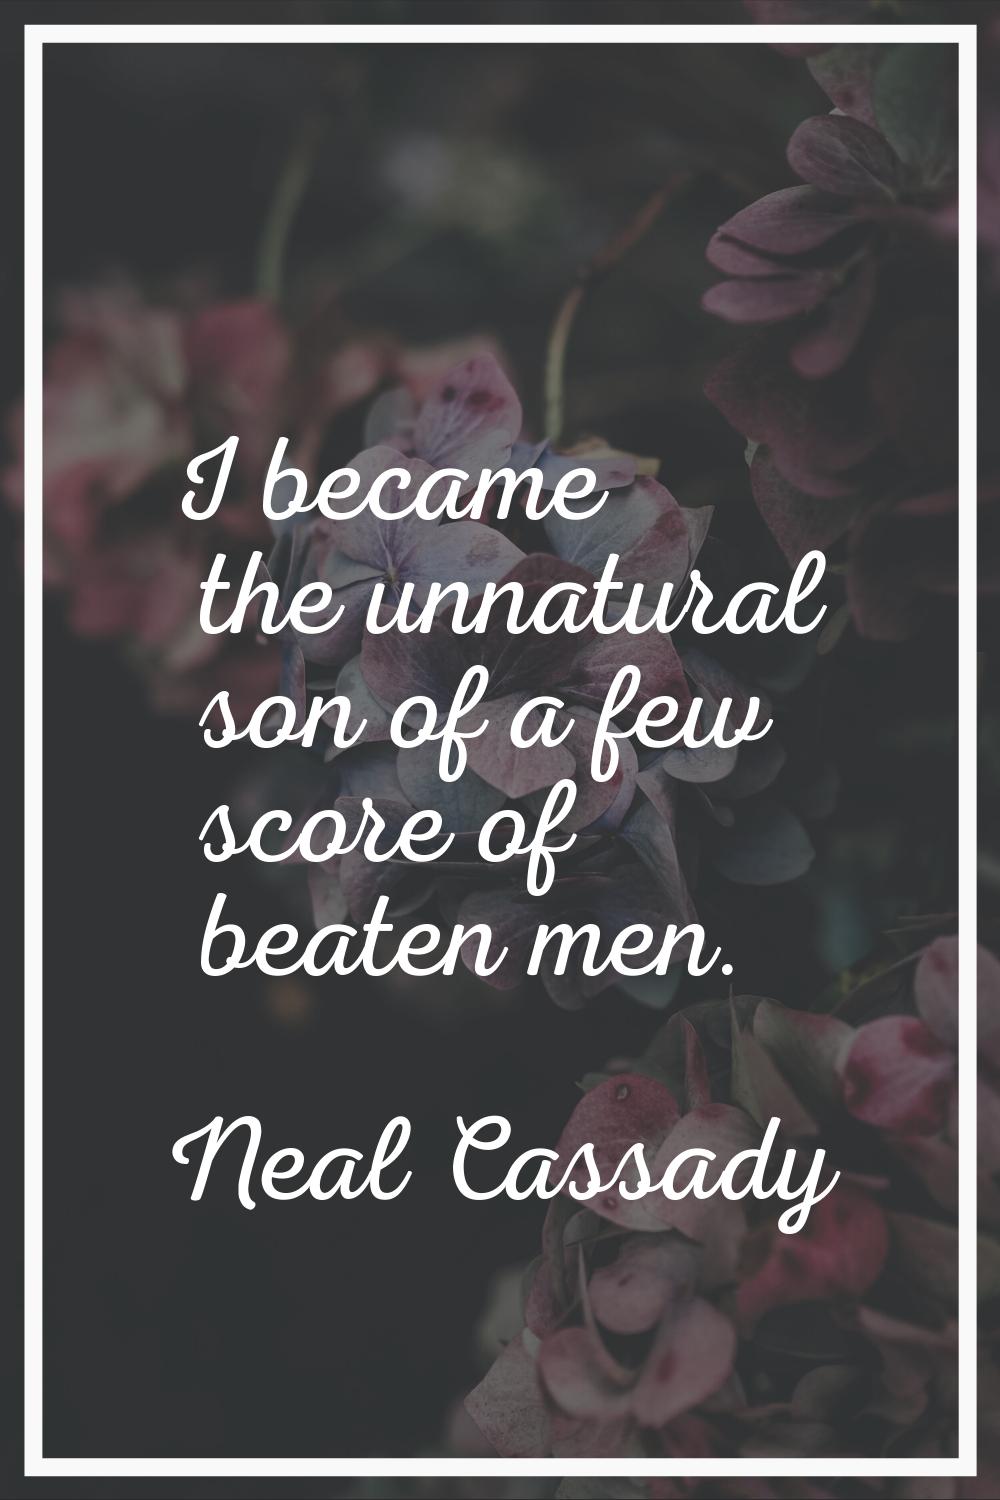 I became the unnatural son of a few score of beaten men.